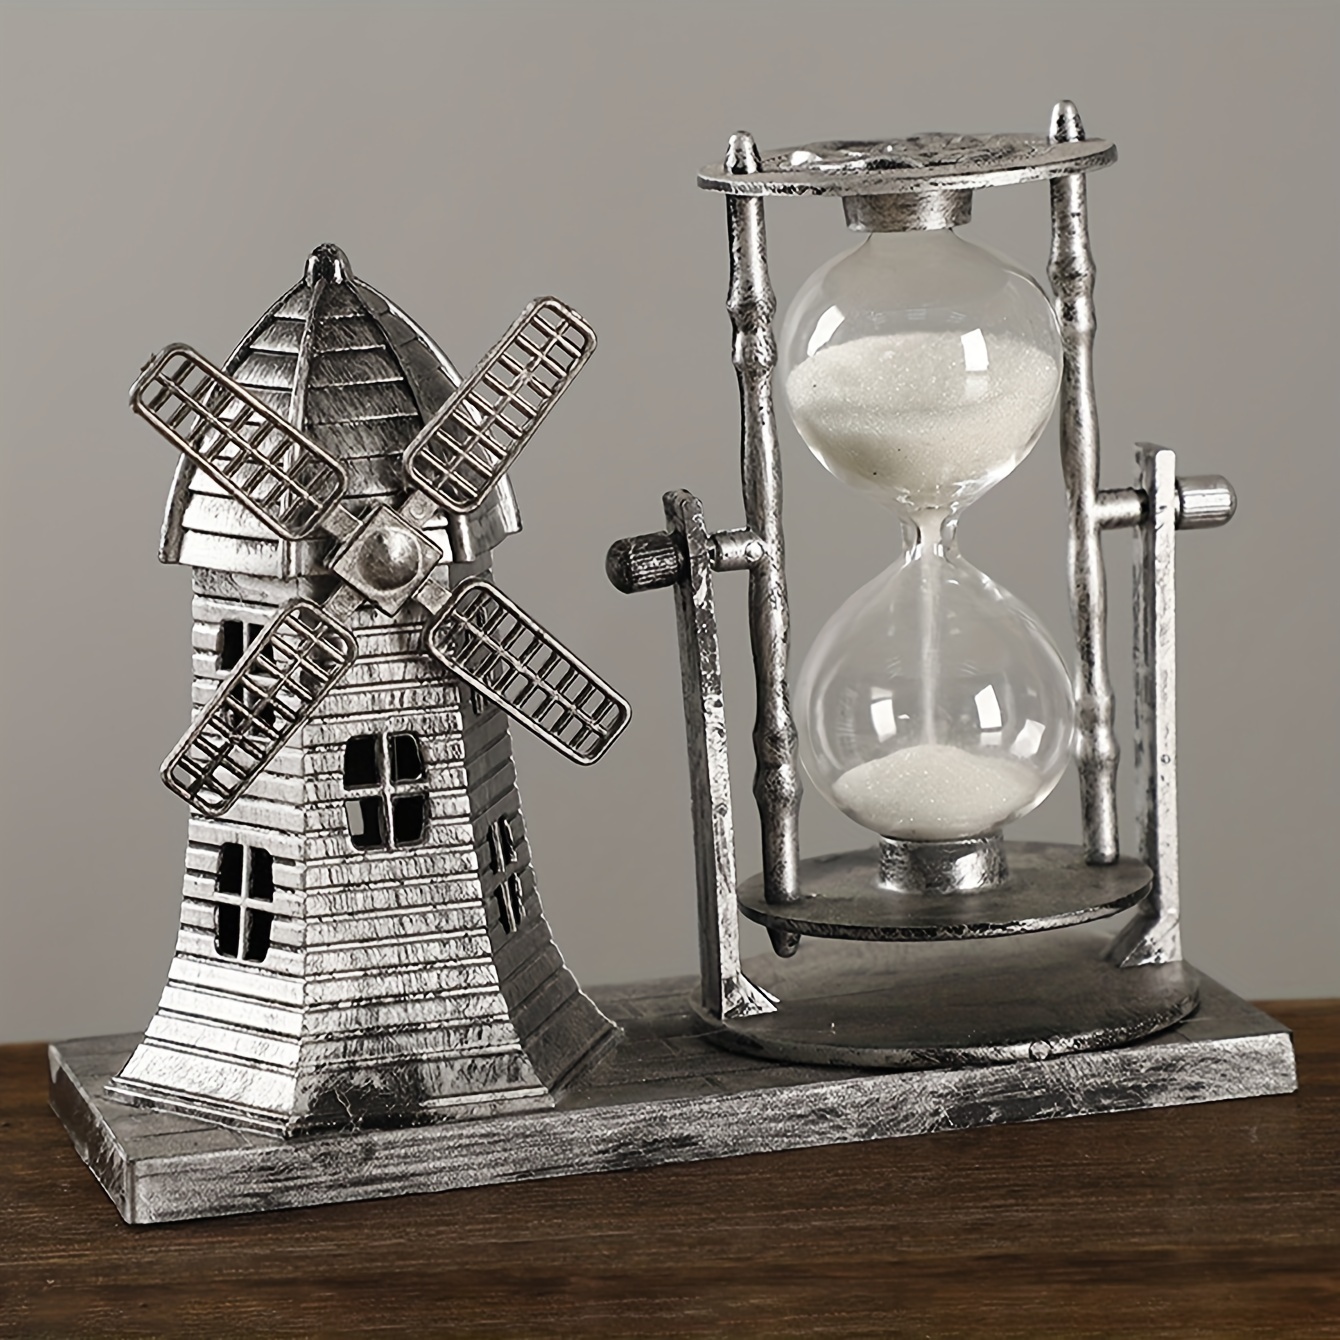 

Vintage Silver Windmill Hourglass Timer - 1pc Decorative Sand Timer For Office, Bar Cabinet, Dining Table Decoration - Perfect Gift For Him/her - No Electricity Required